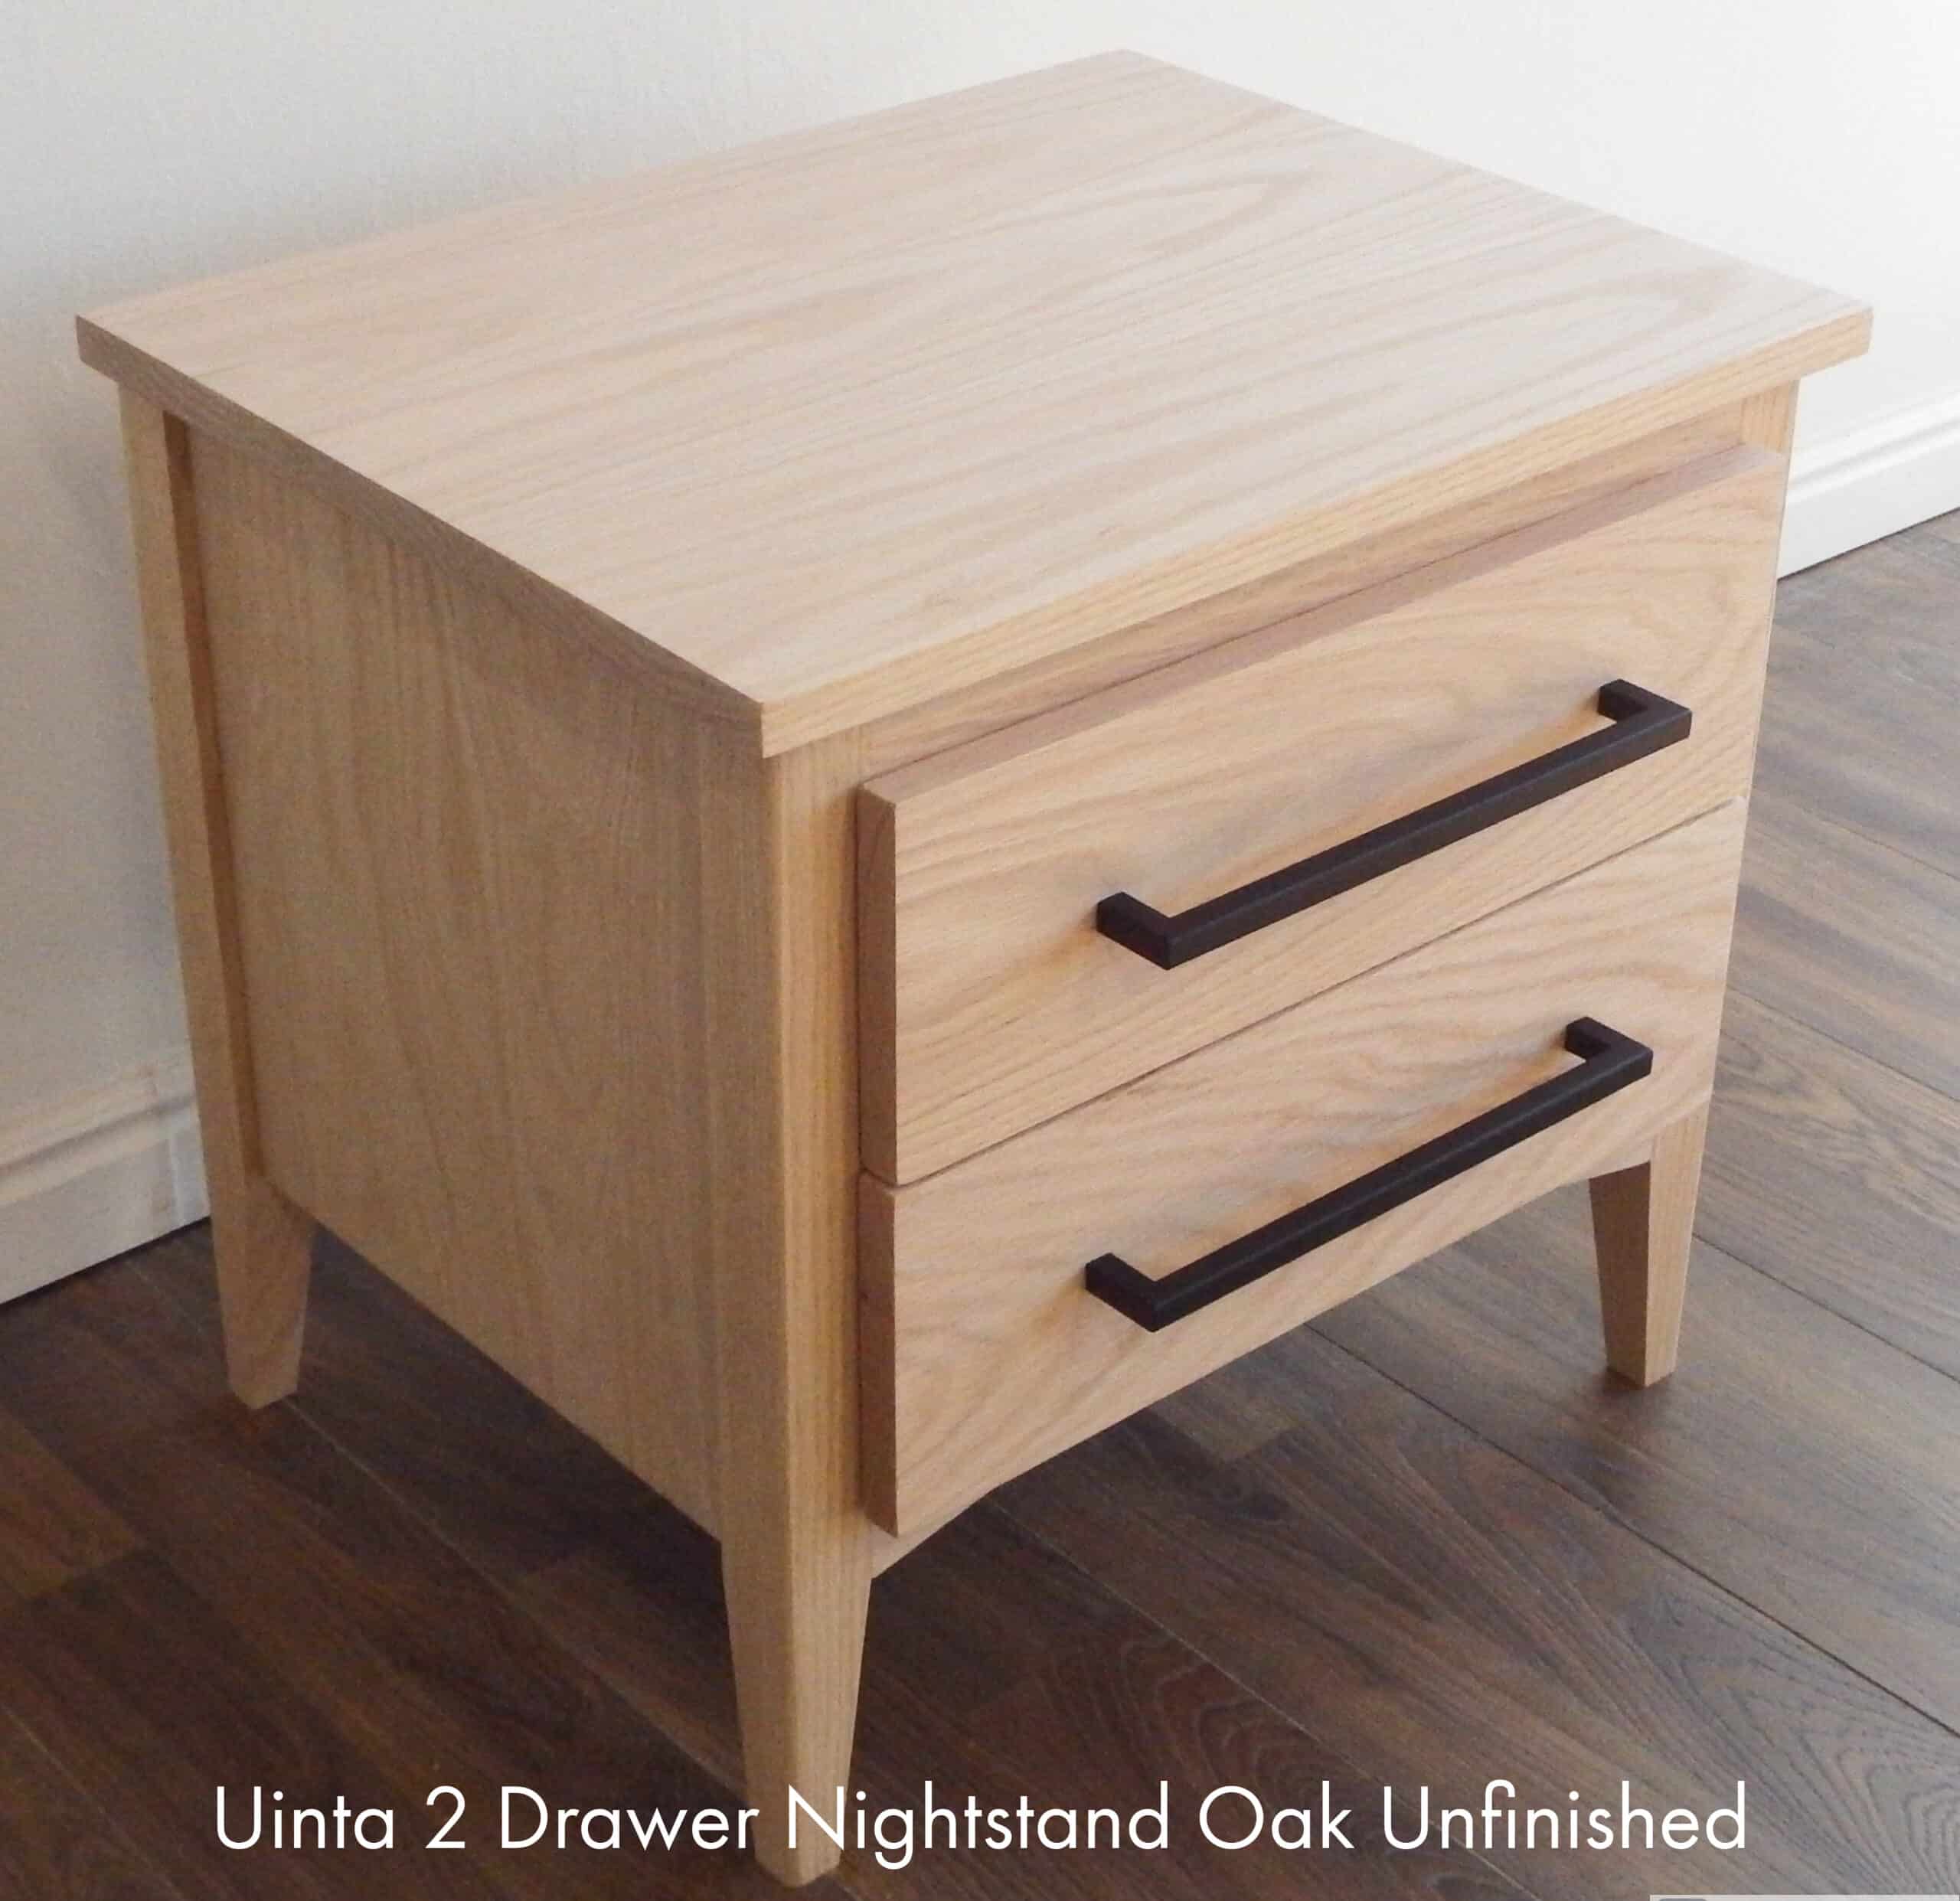 Uinta 2 Drawer Nightstand from Gimme the Good Stuff